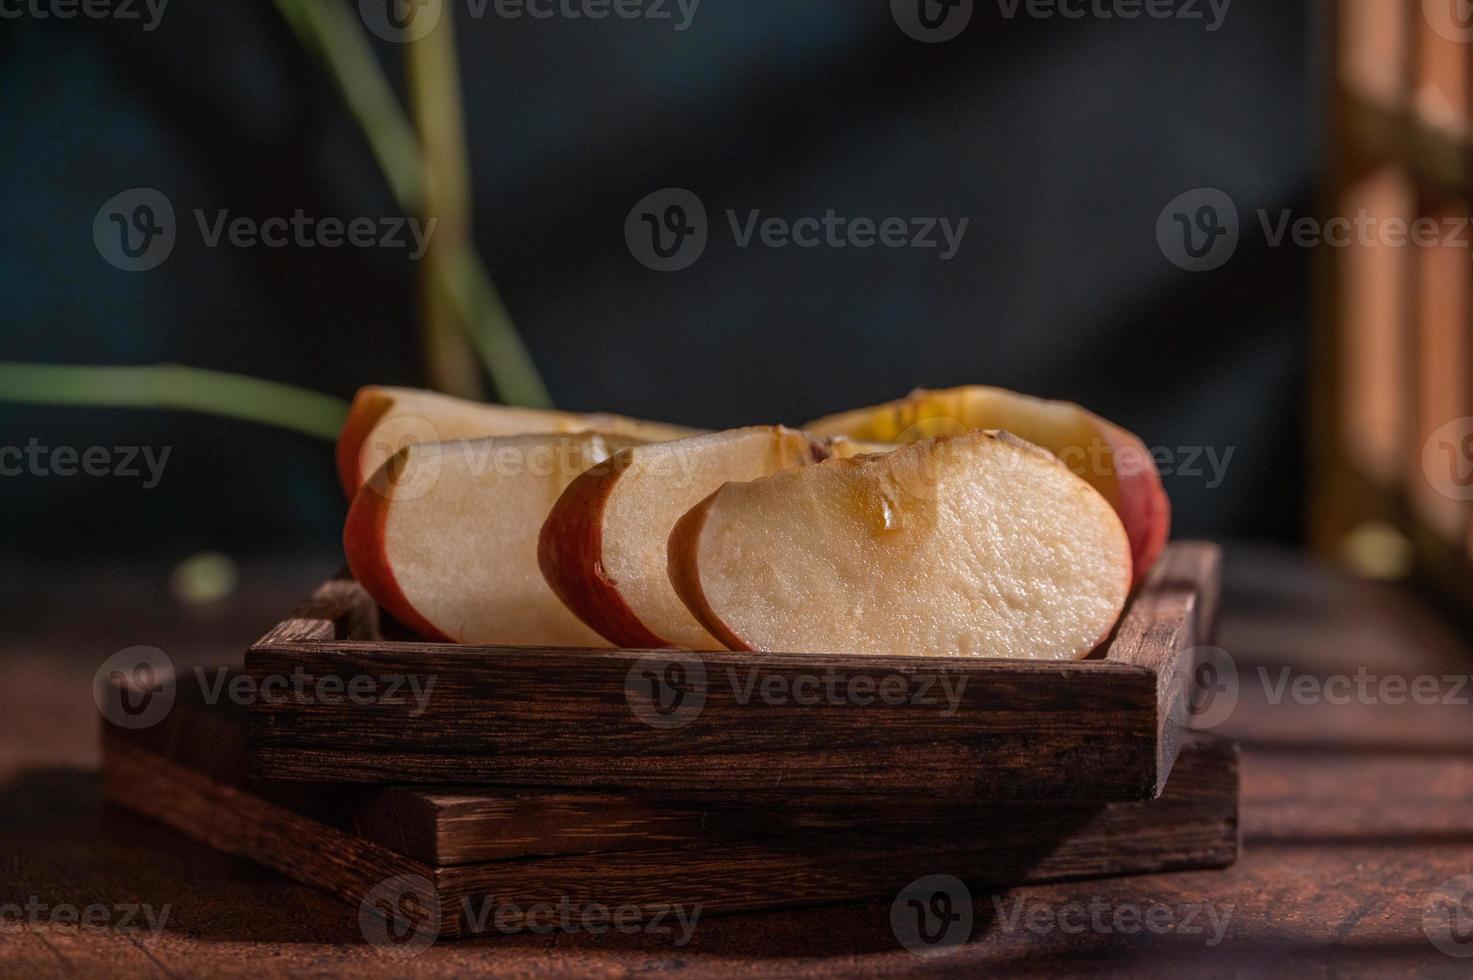 The apples on the plate look like oil paintings under the dim light on the wood grain table photo